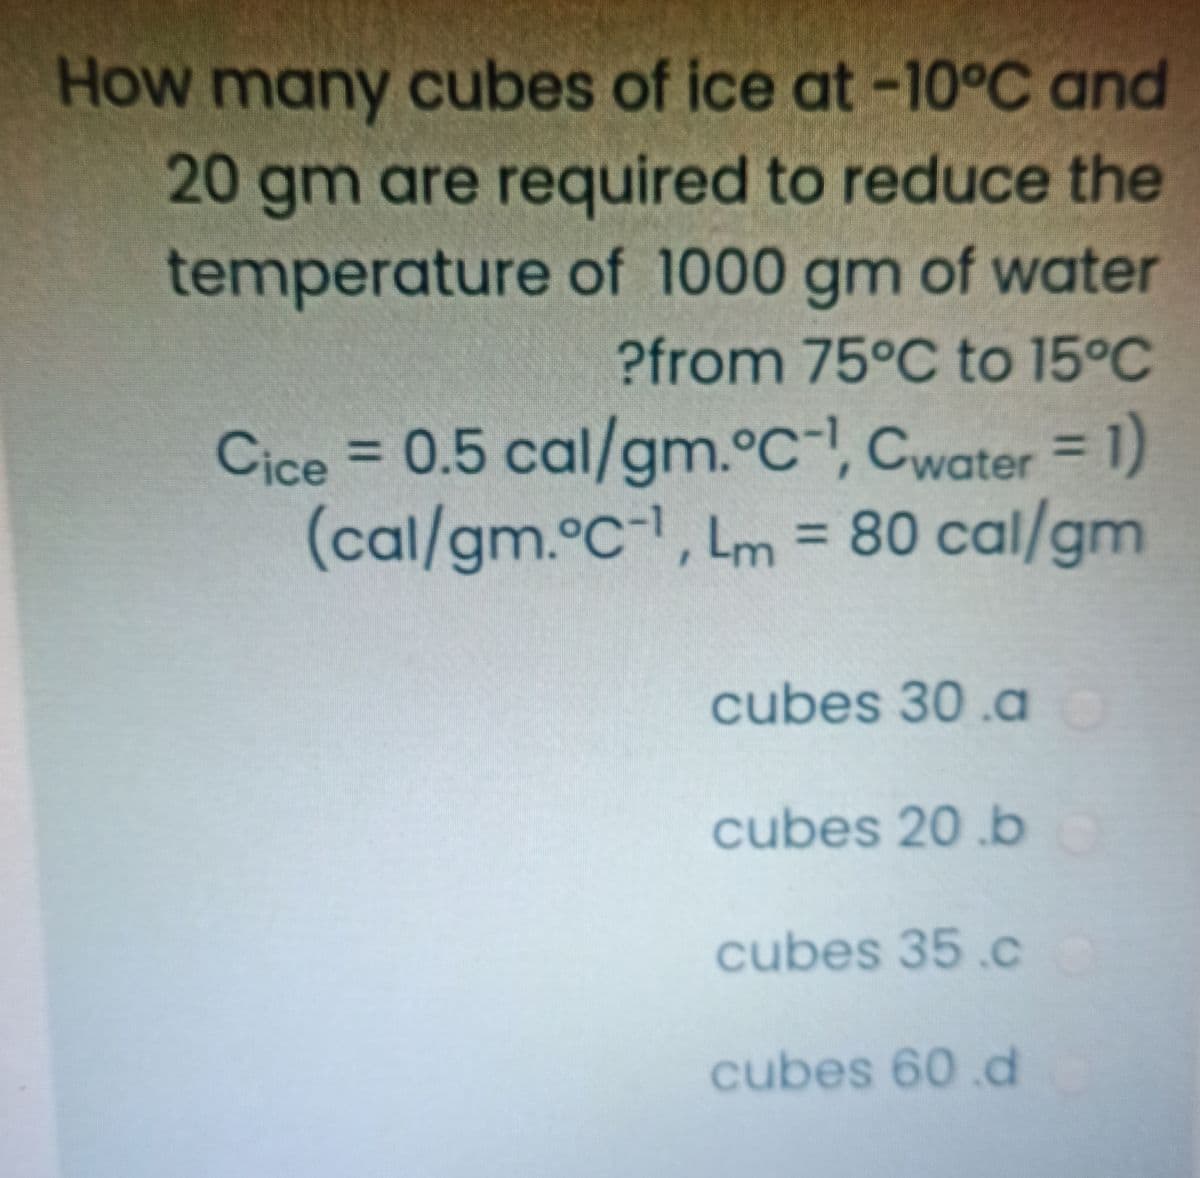 How many cubes of ice at -10°C and
20 gm are required to reduce the
temperature of 1000 gm of water
?from 75°C to 15°C
Cice = 0.5 cal/gm.°C-, Cwater = 1)
(cal/gm.°C-1, Lm = 80 cal/gm
%3D
cubes 30.a
cubes 20 .b
cubes 35.cC
cubes 60.d
